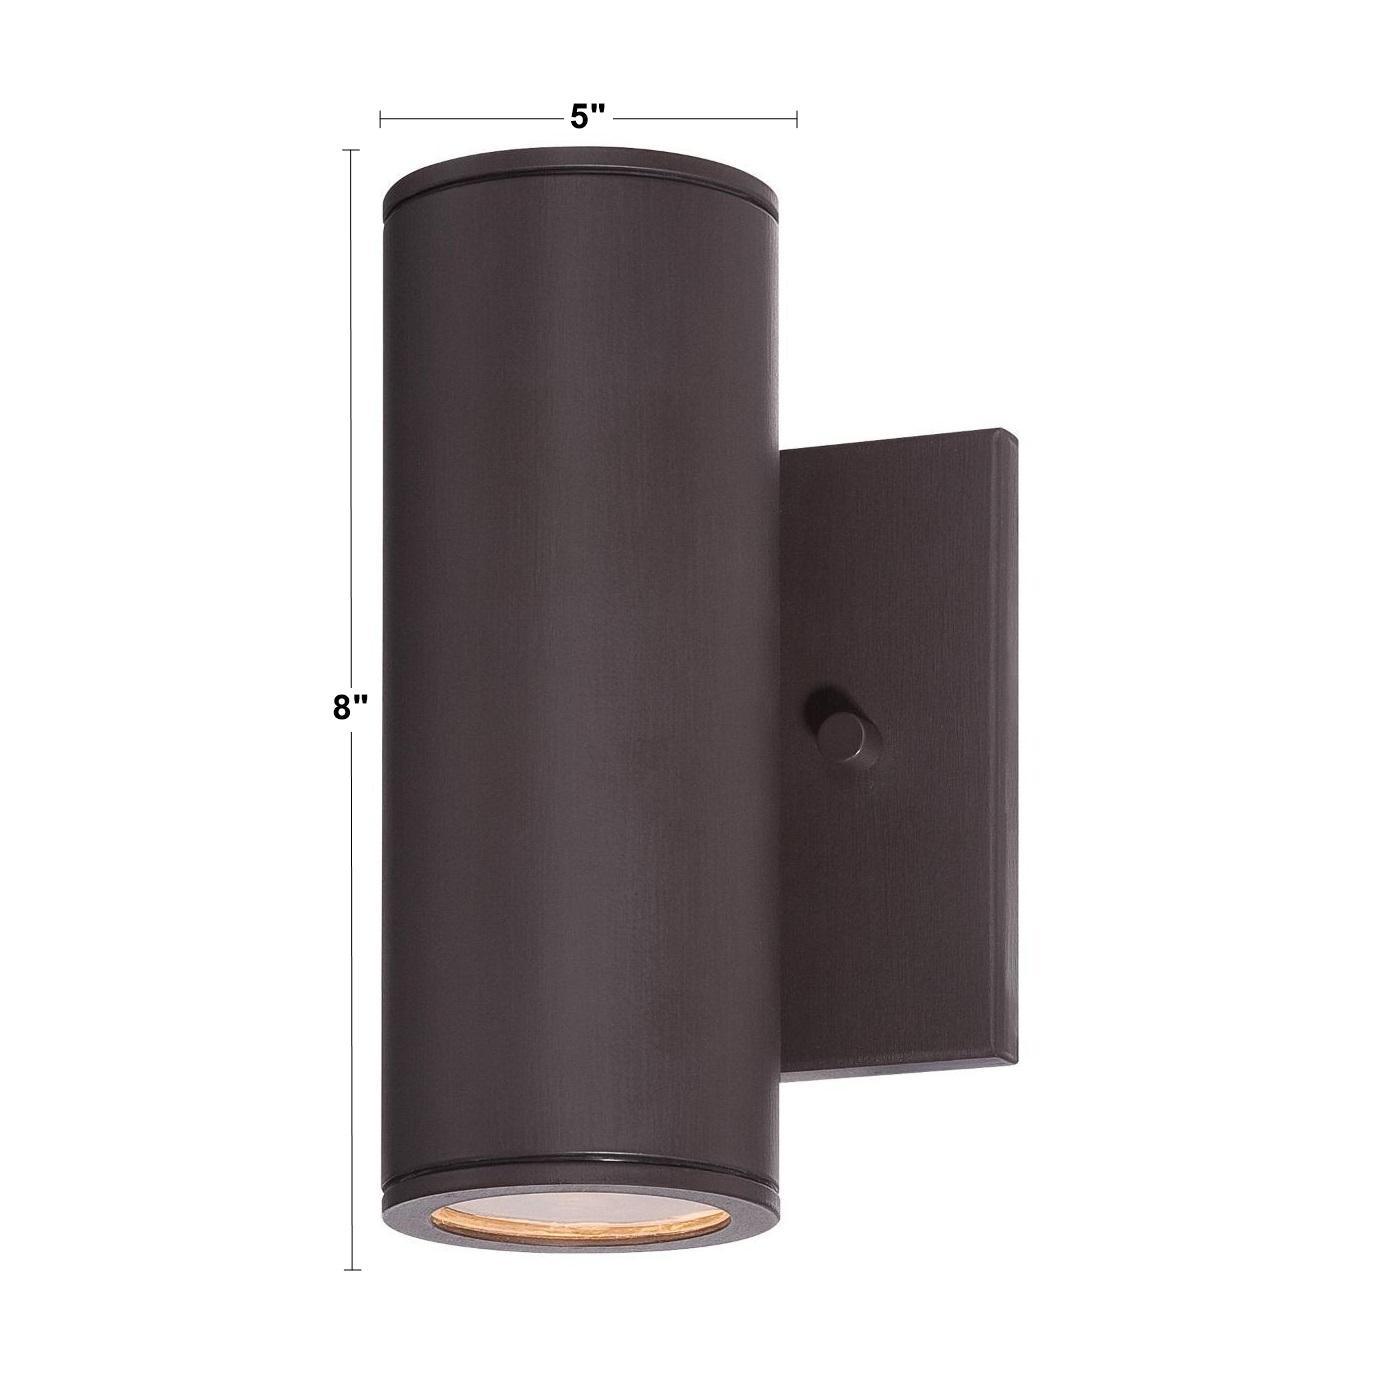 Skyline 8 In LED Outdoor Cylinder Wall Light 3000K